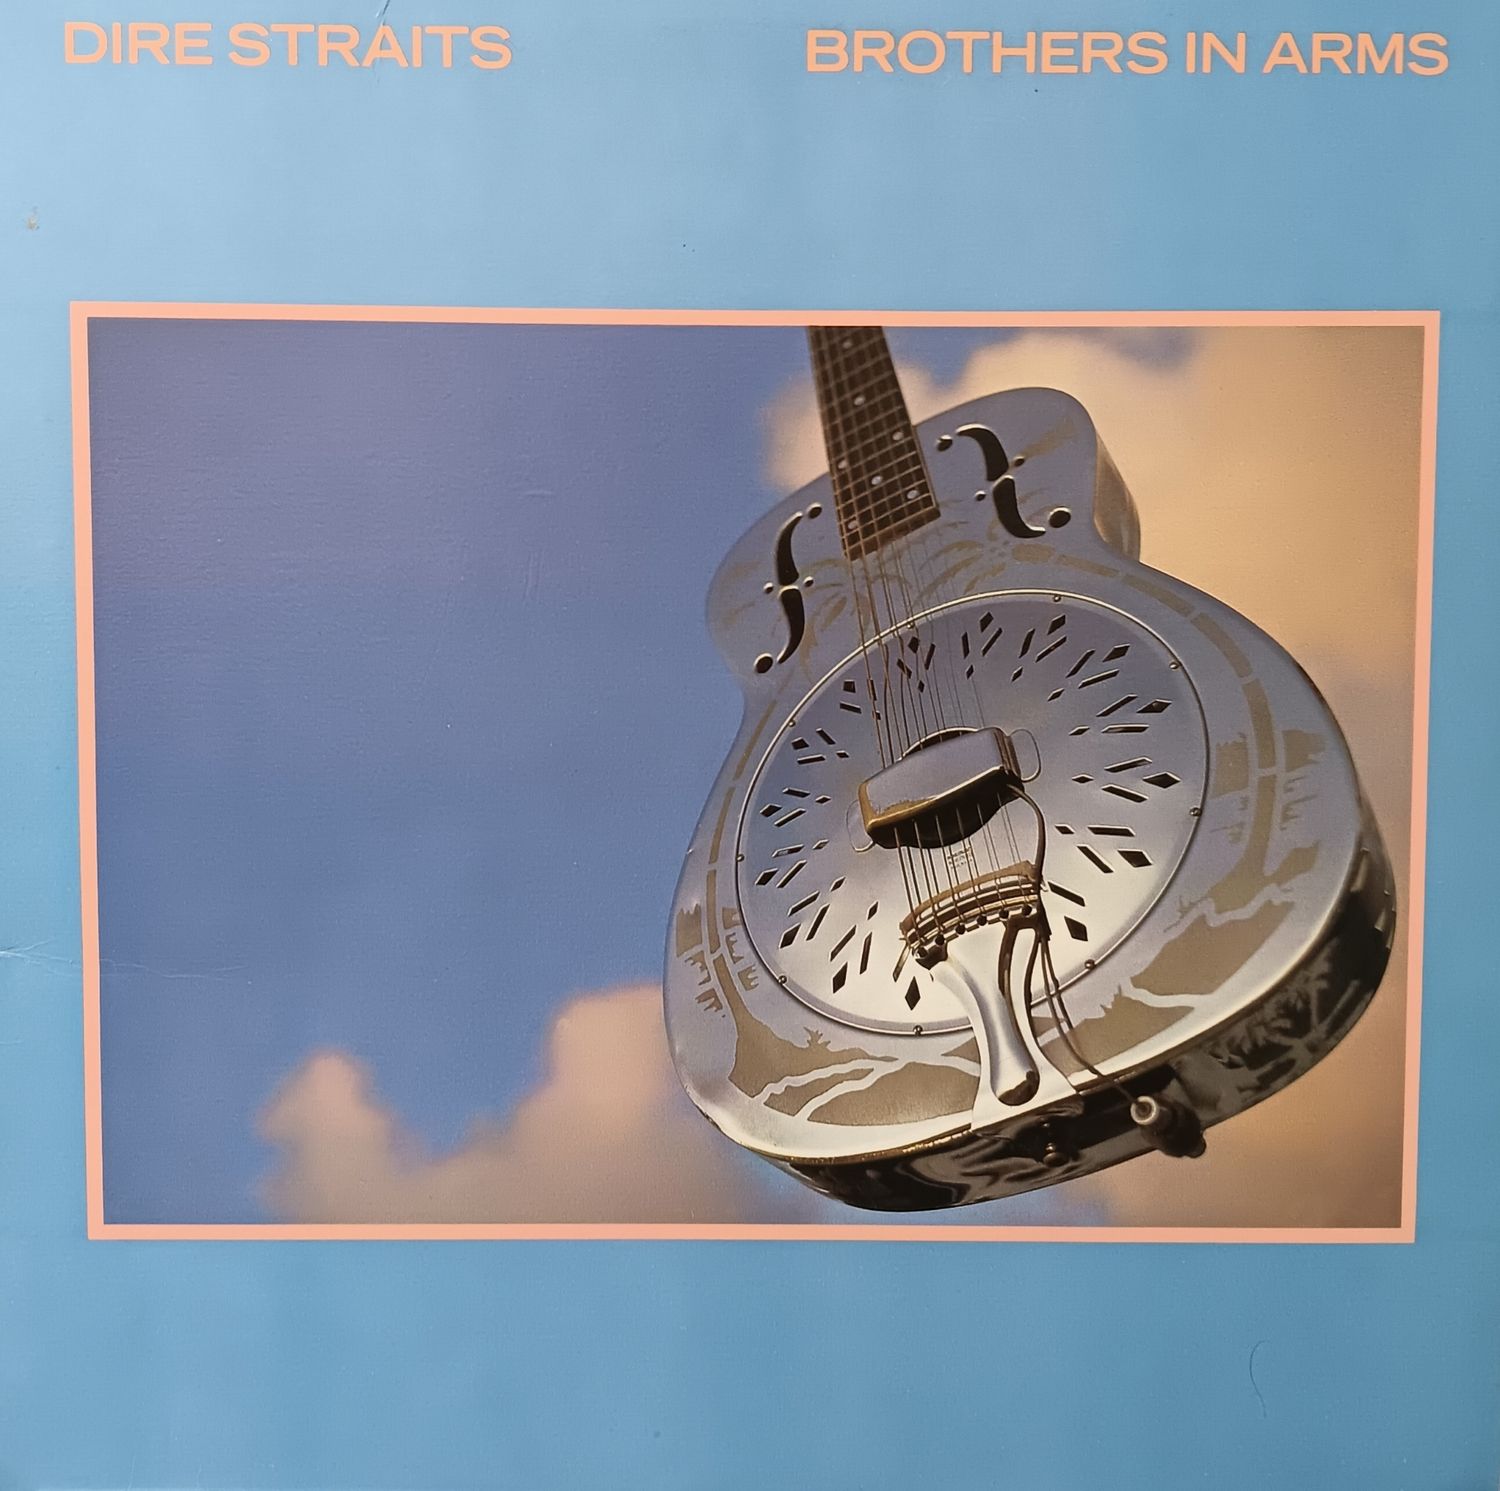 DIRE STRAITS - Brothers in arms